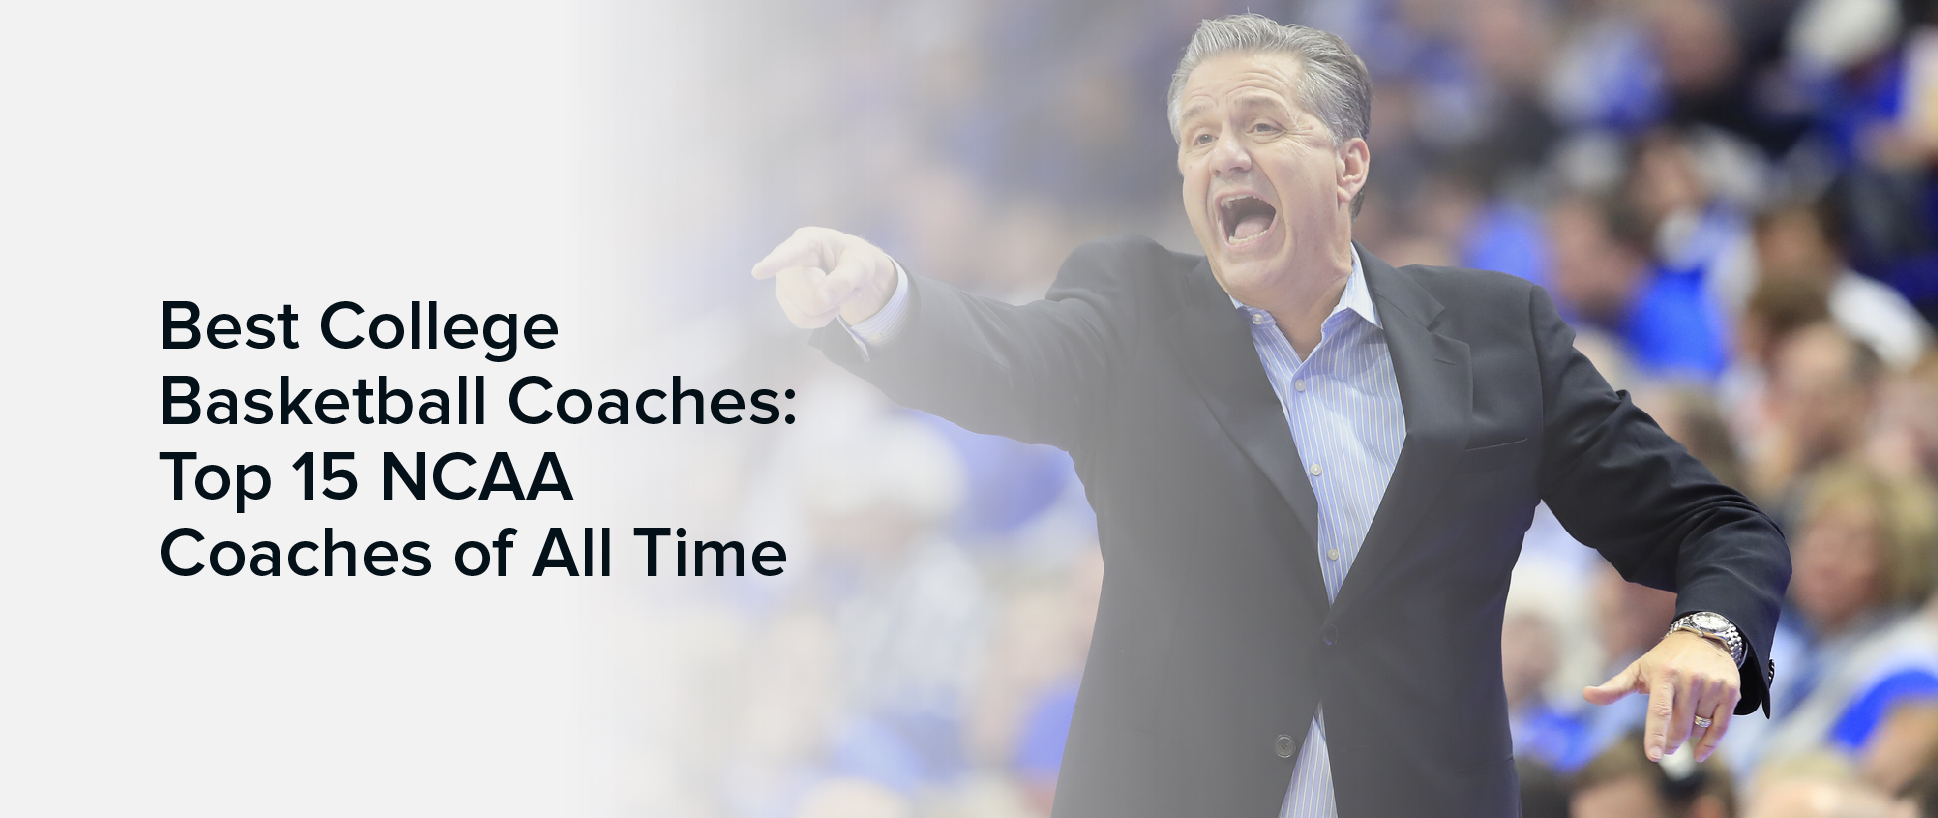 Best College Basketball Coaches